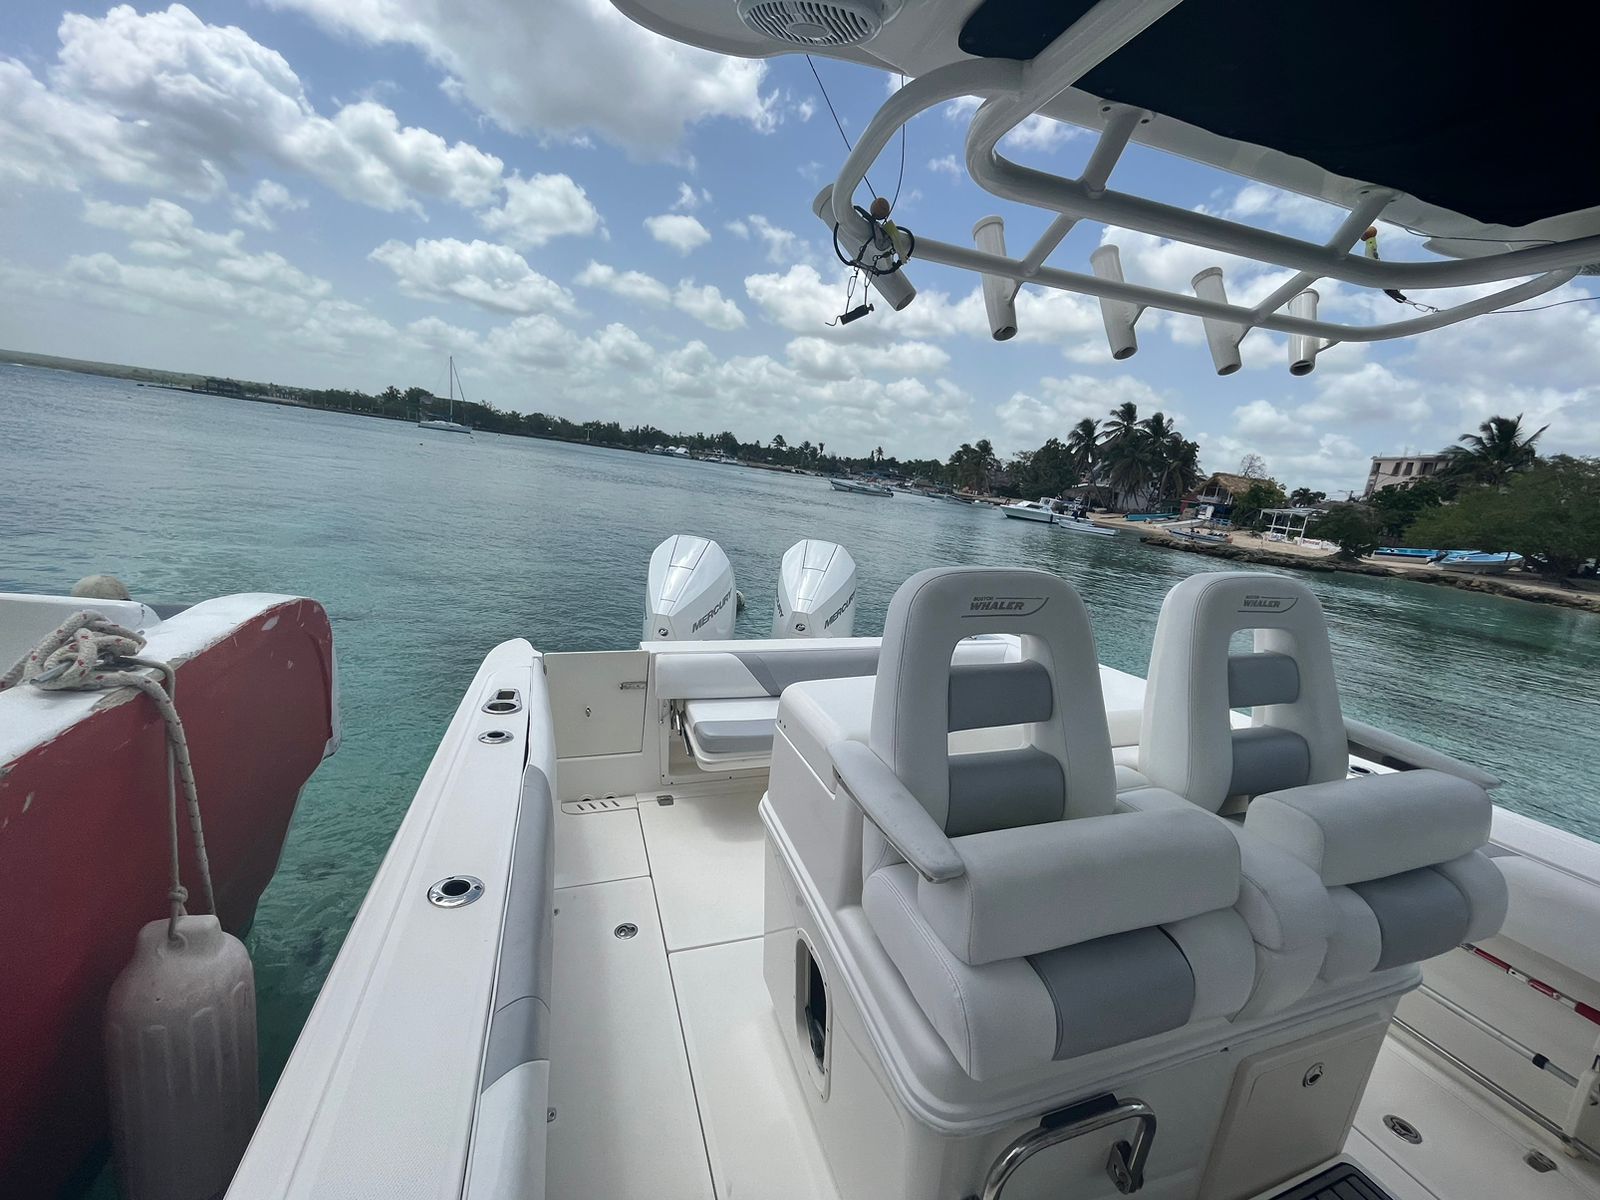 7828826323_Boston_Whaler_speedboat_for_Private_Rentals_from_Bayahibe_to_Saona_or_Catalina_islands.jpeg